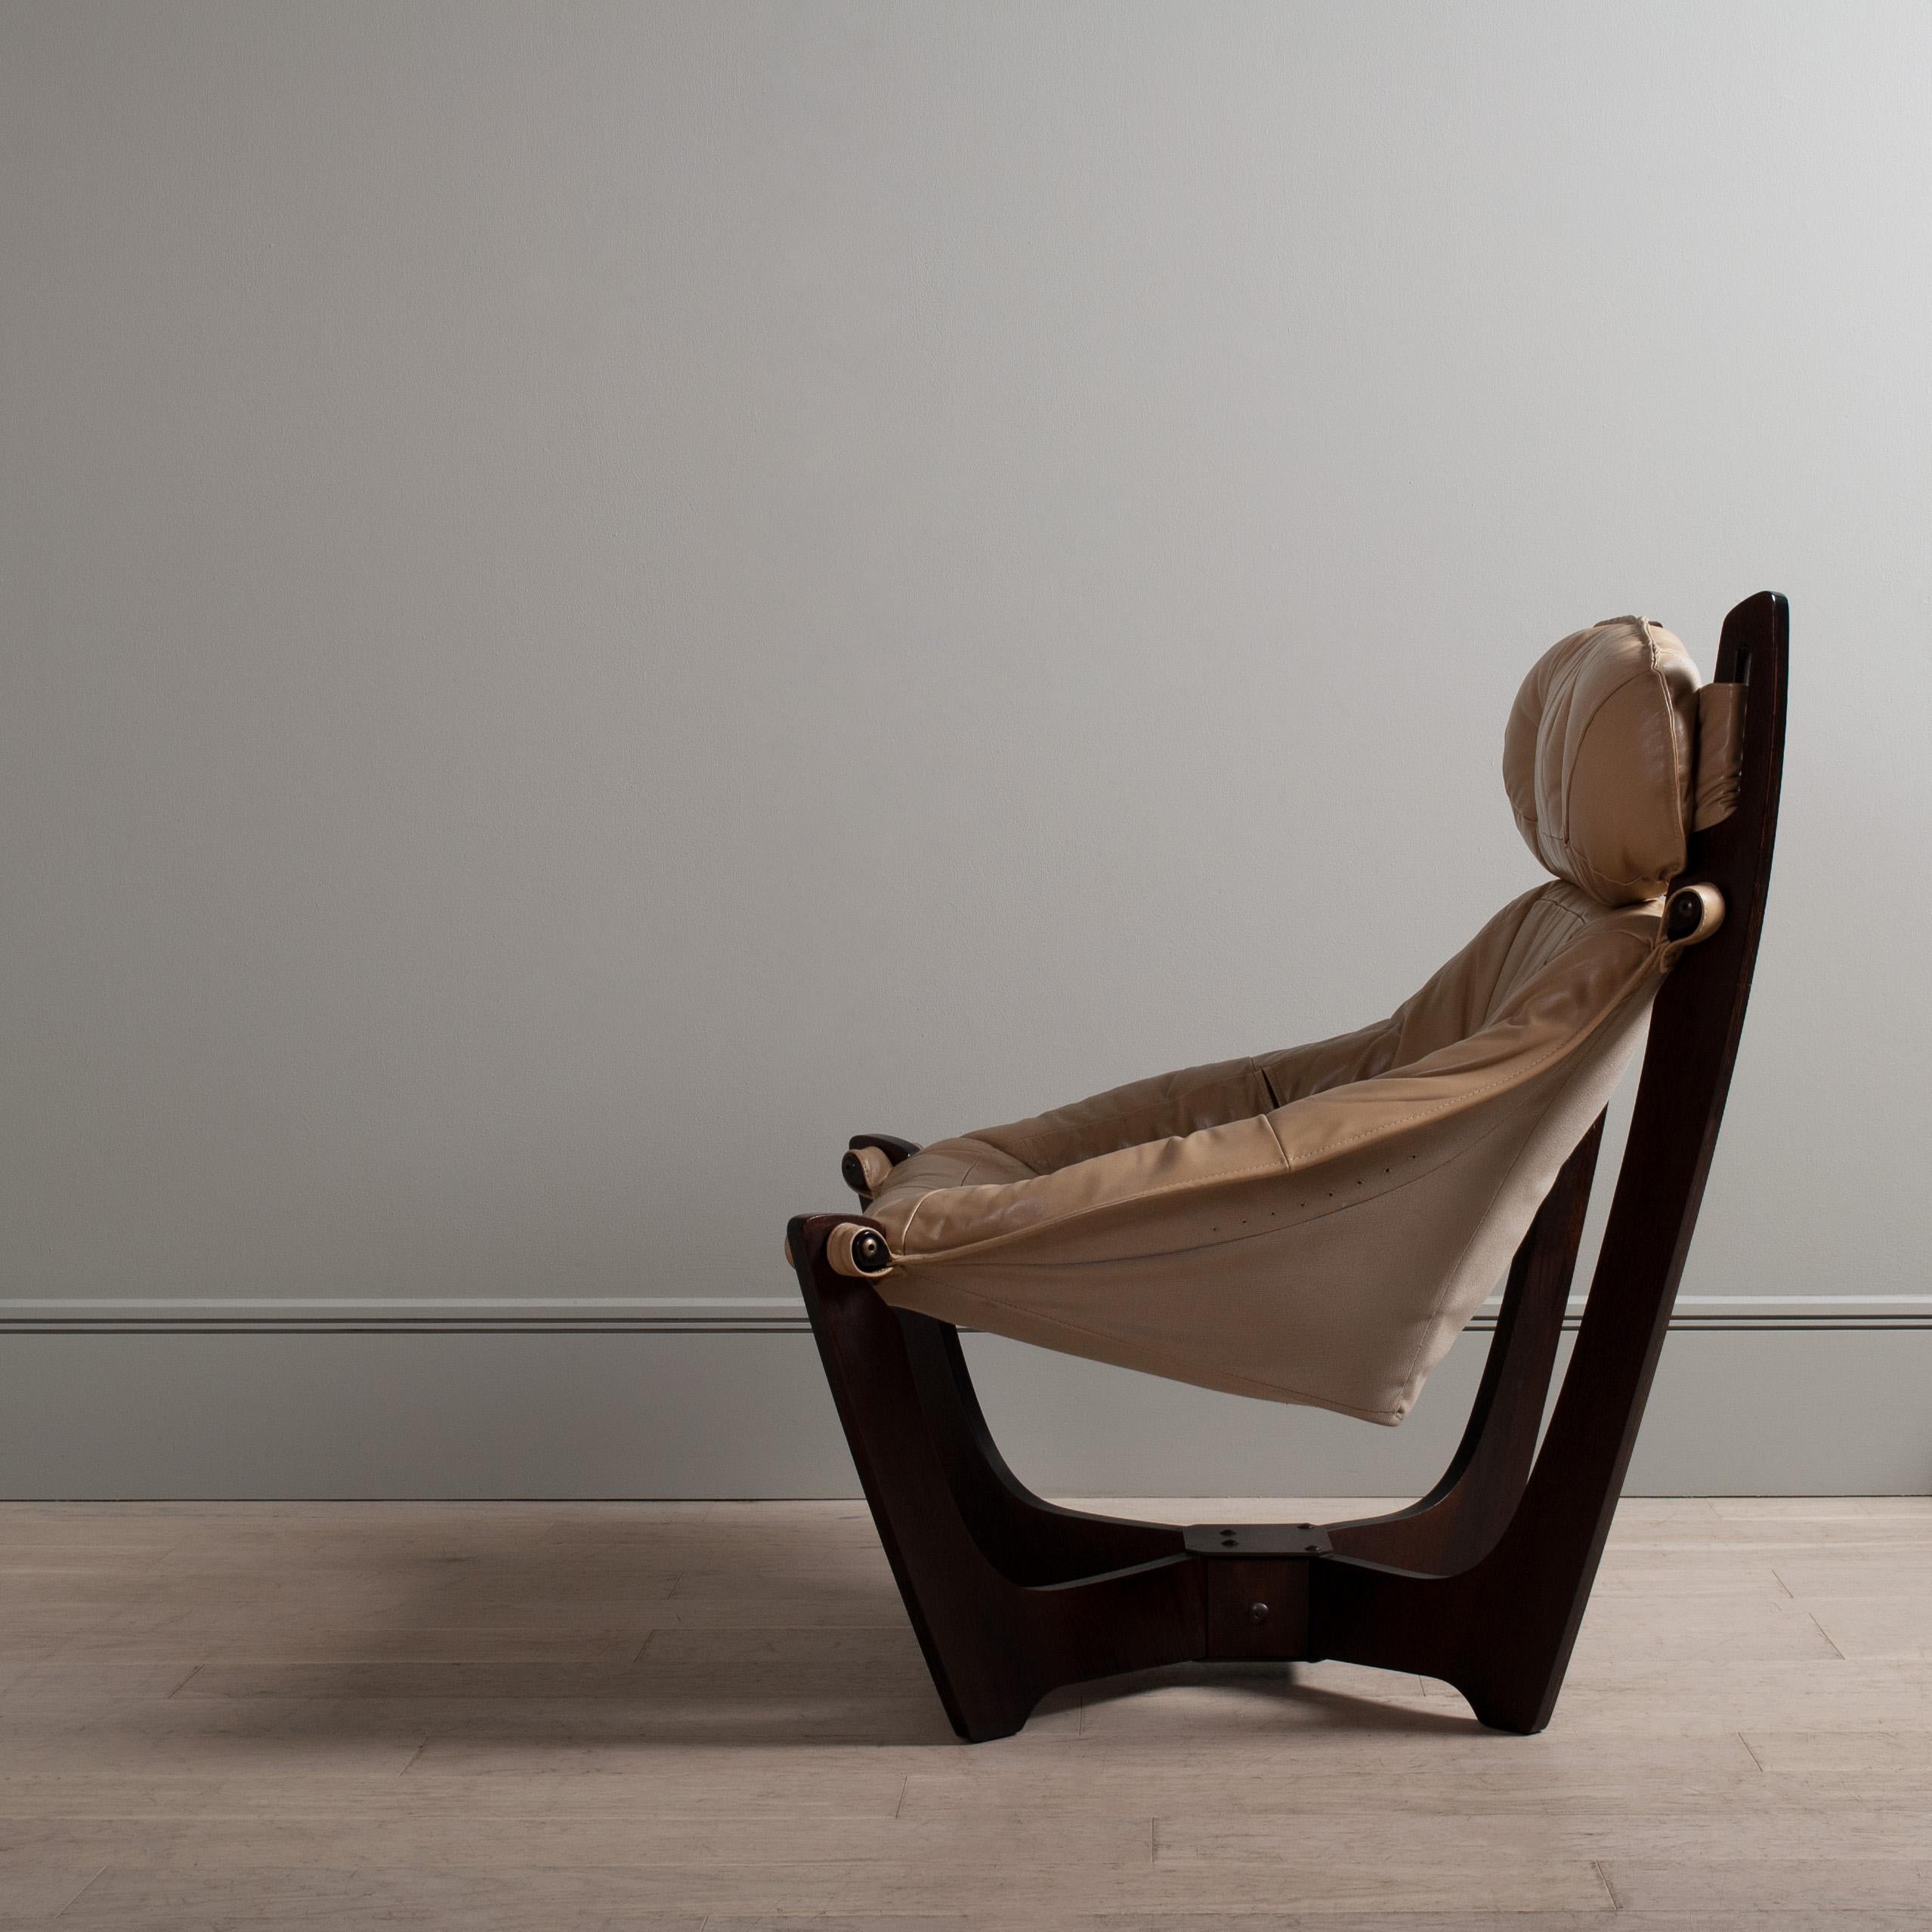 A pair of incredible lounge chairs by Norwegian designer Odd Knutsen. The Luna chair is a wonderful space age design that suspends the sitter within the wooden frame. A genius and complex design. The upholstery is leather and the frame dark rosewood